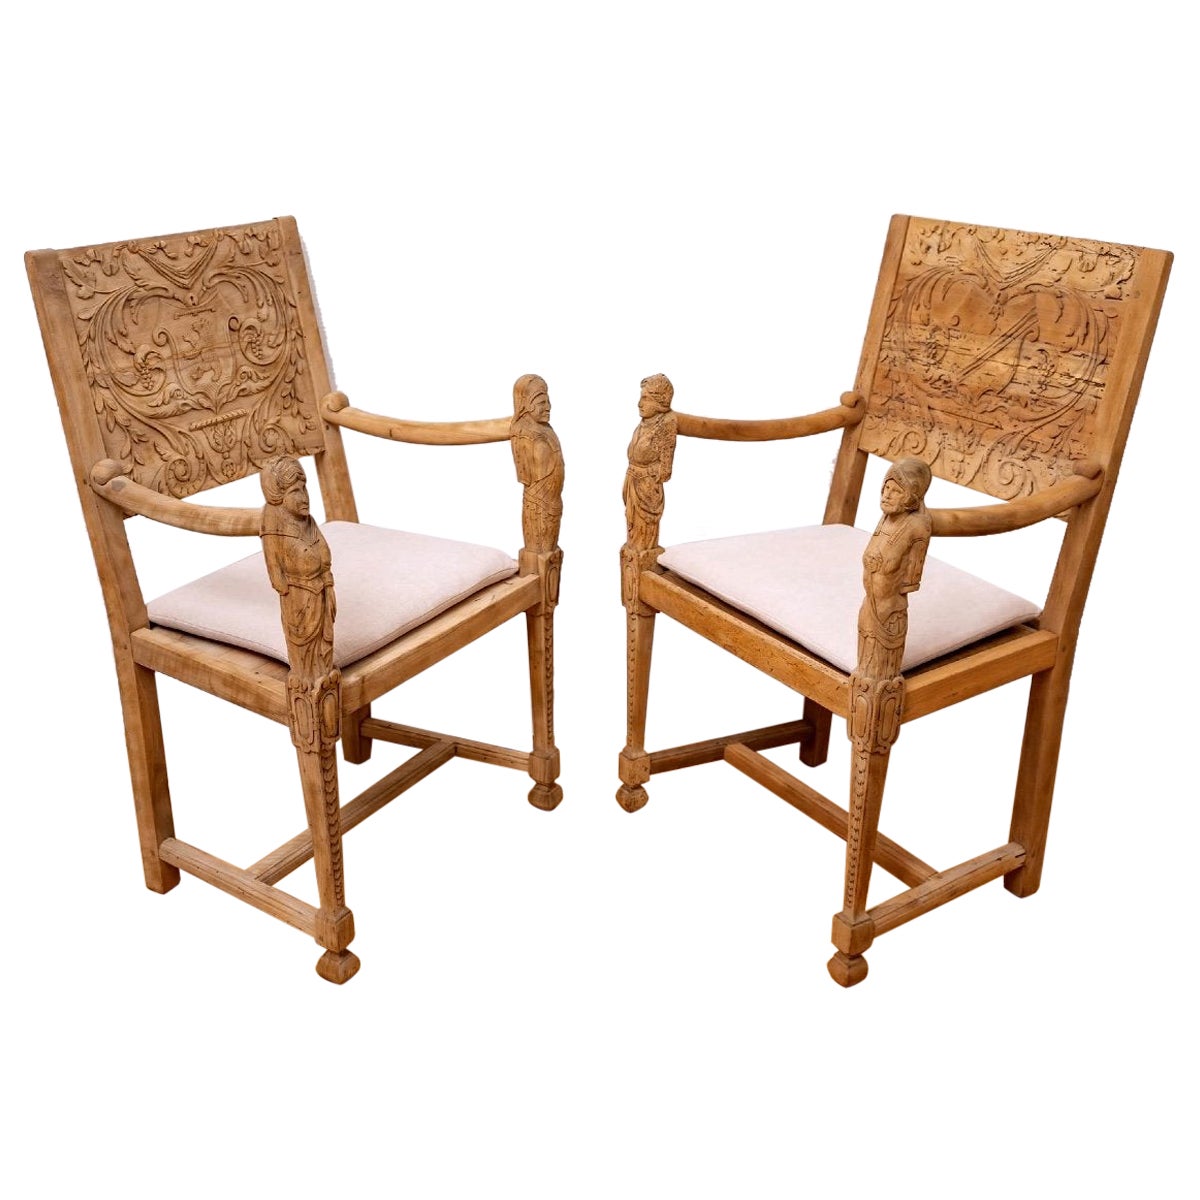 Pair of Neo-Gothic Ceremonial Armchairs, Solid Walnut, Period: 19th Century For Sale